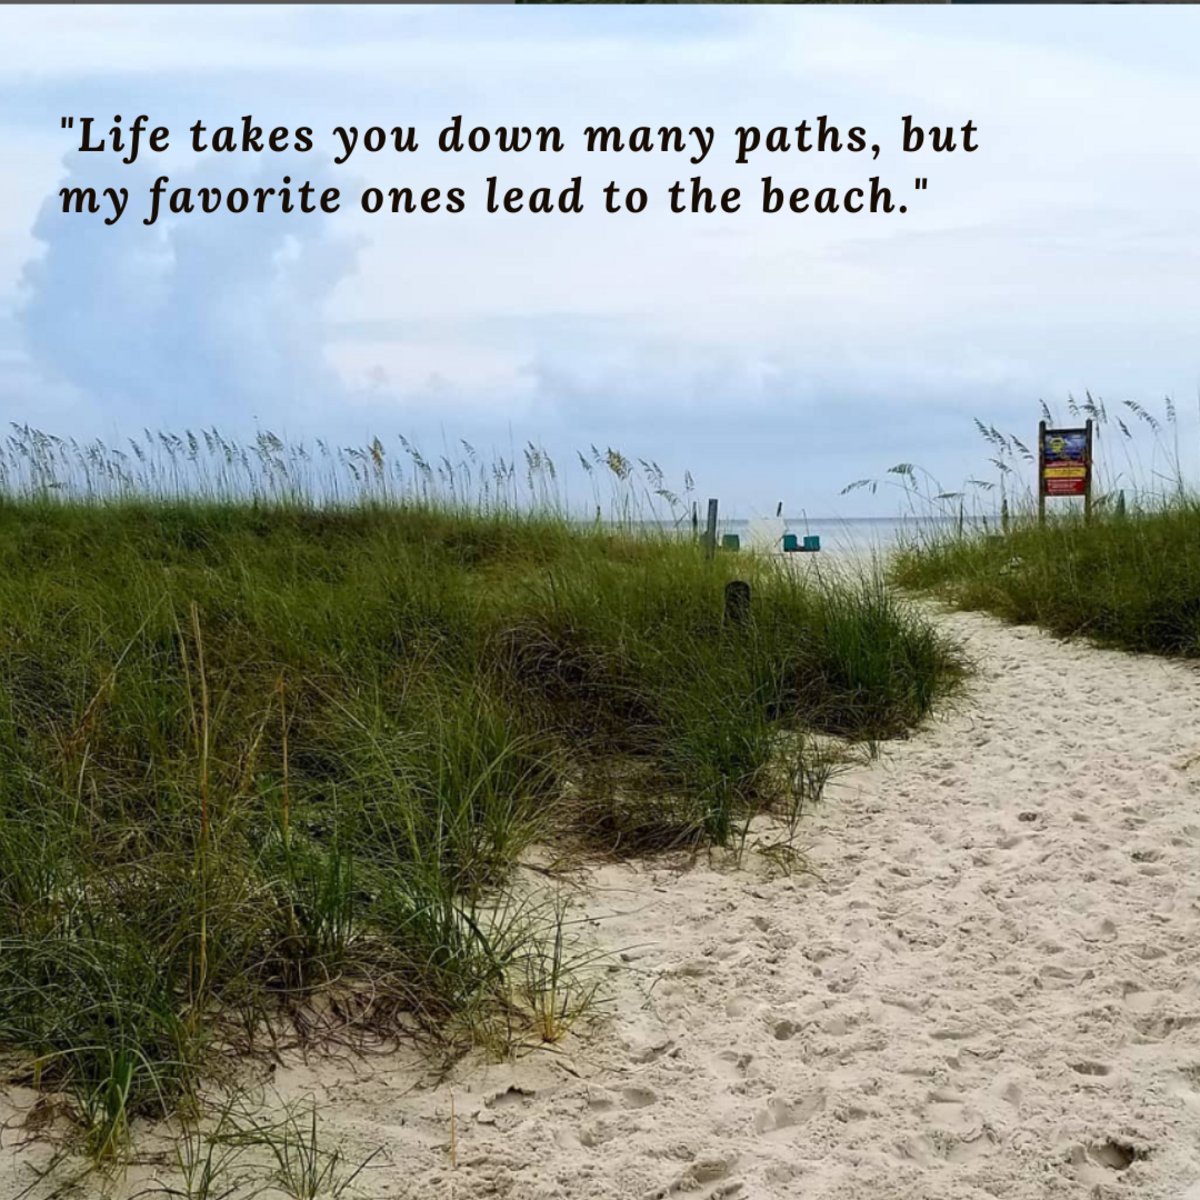 Follow your heart to the white sandy #beaches and clear, emerald waters of #OrangeBeachAlabama! Our hotel is right on the beach, so you can get there easily and on your own time. 😎 Set your #summervacation plans in motion by clicking this link: bit.ly/3cXJycU